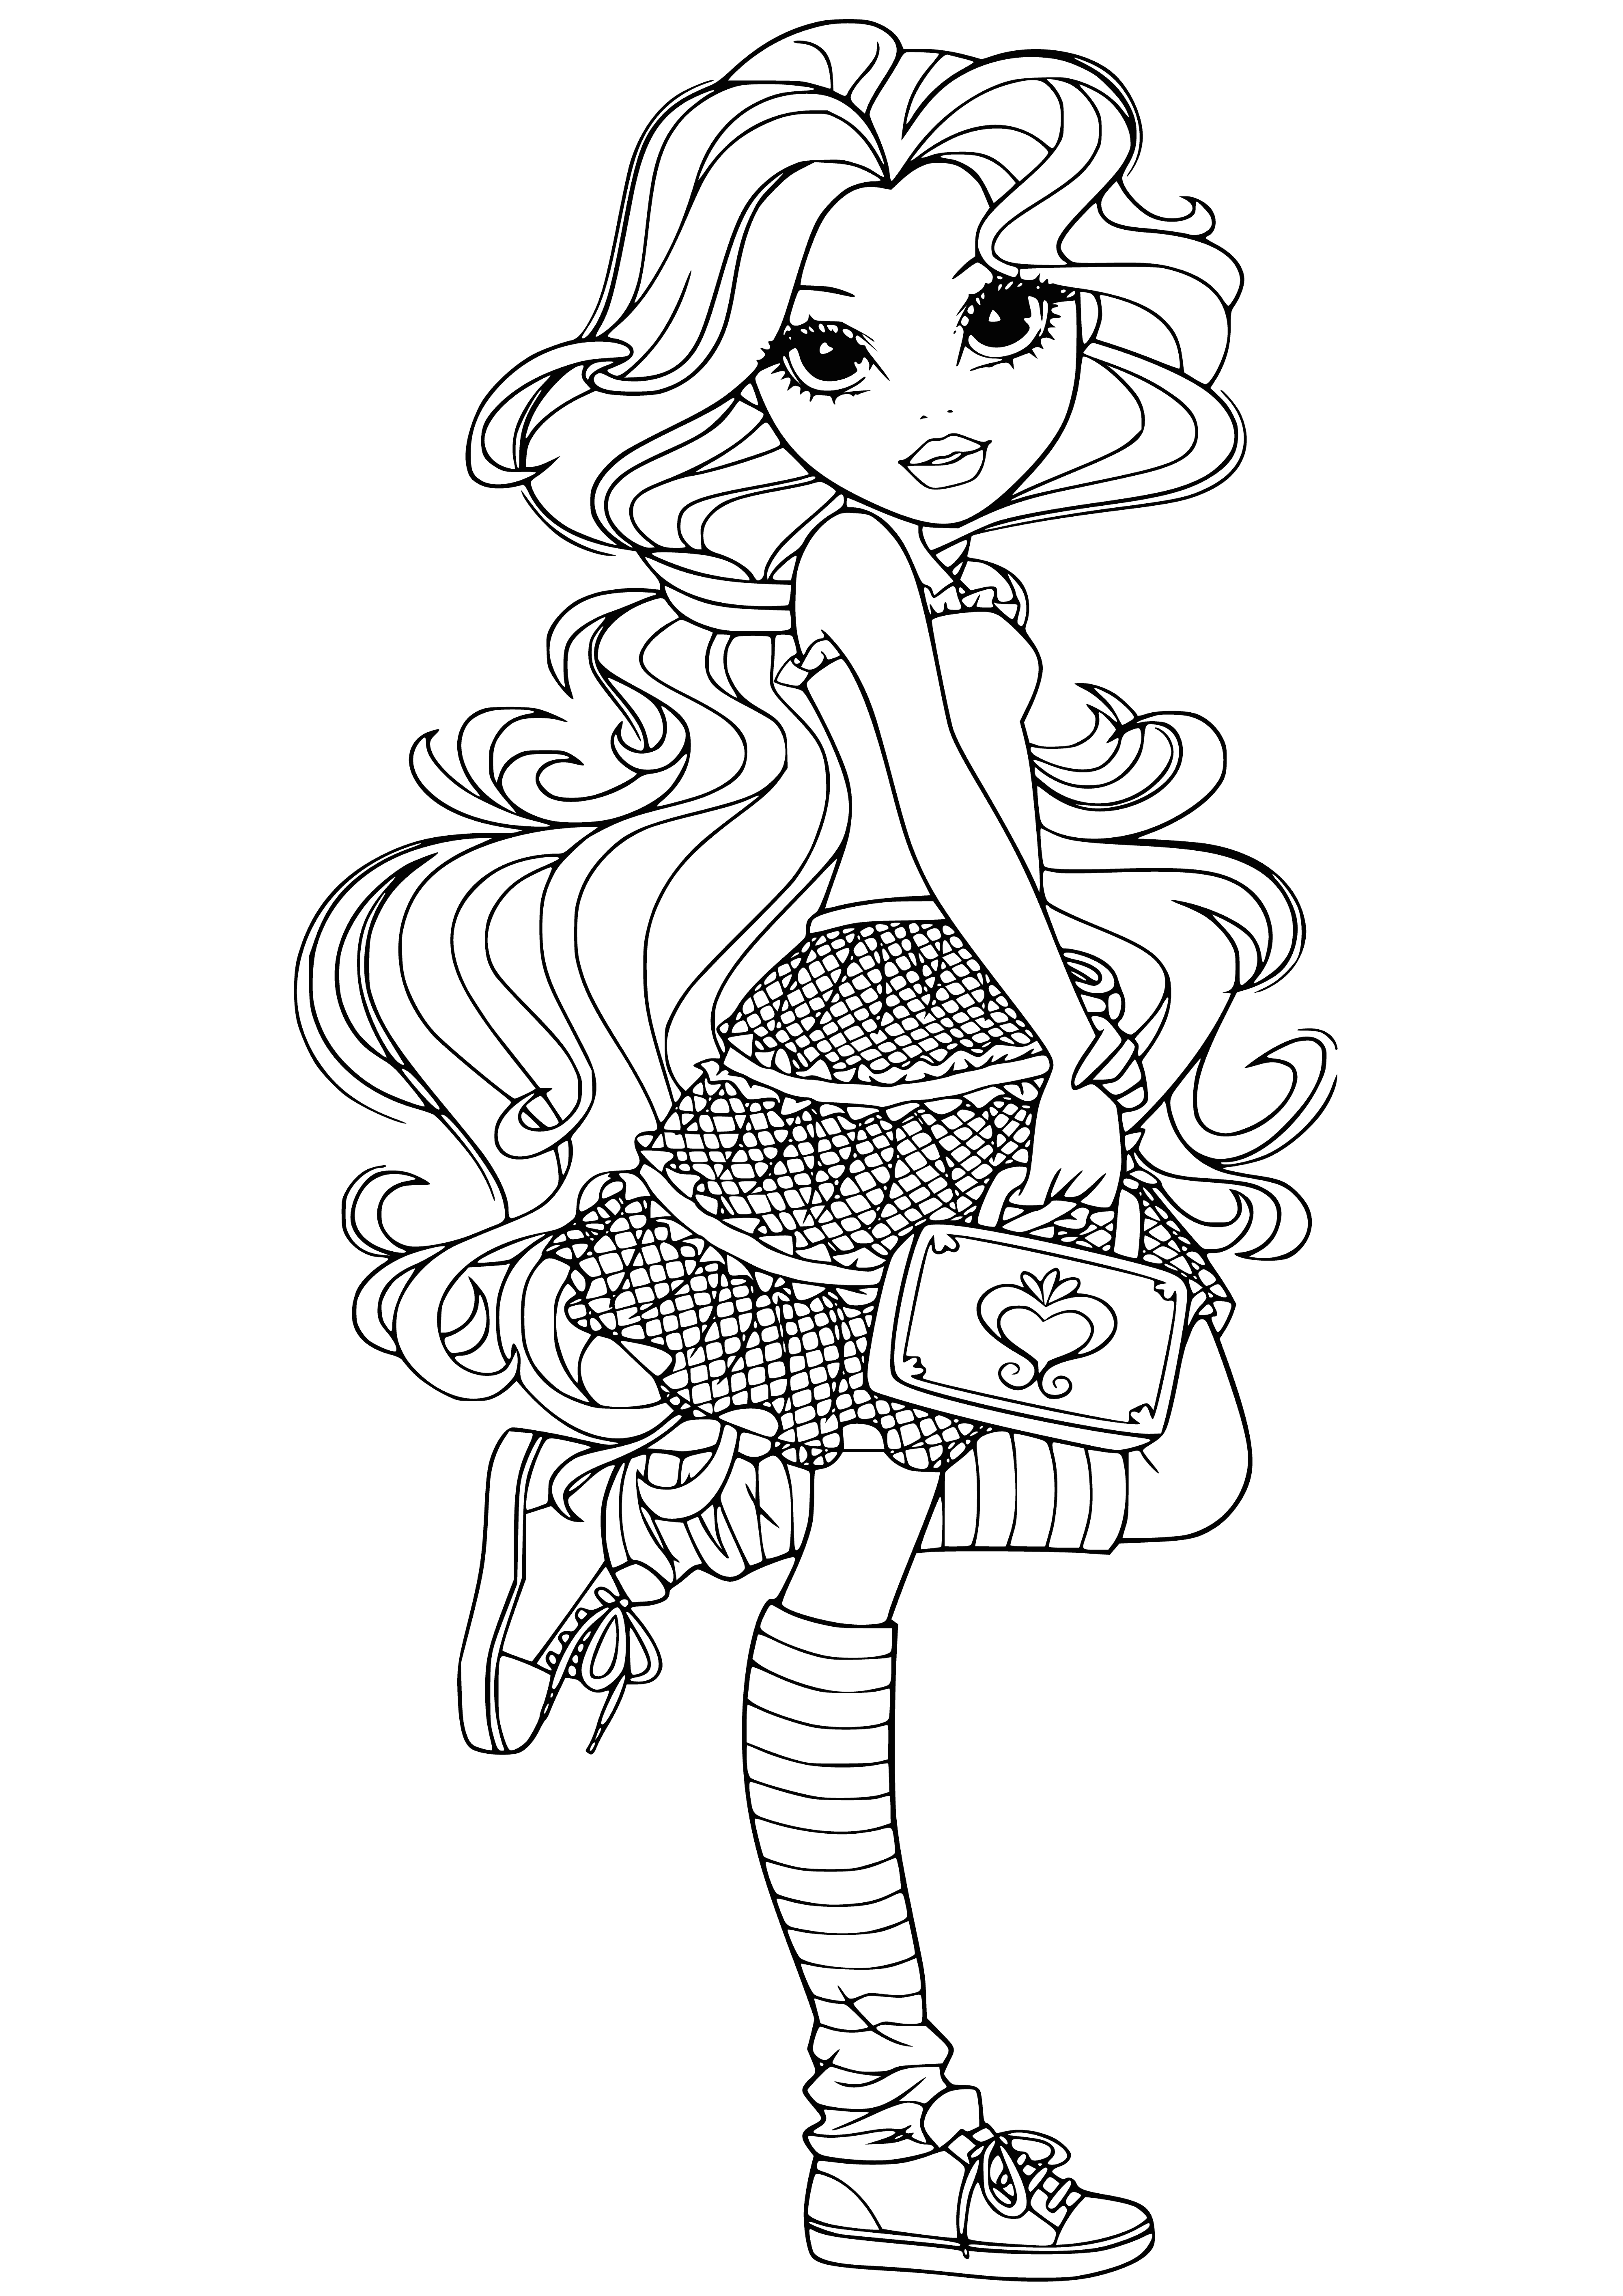 coloring page: A girl with dark hair wearing a purple shirt and skirt, holding a fan and a white flower in her hair. #ColoringPage